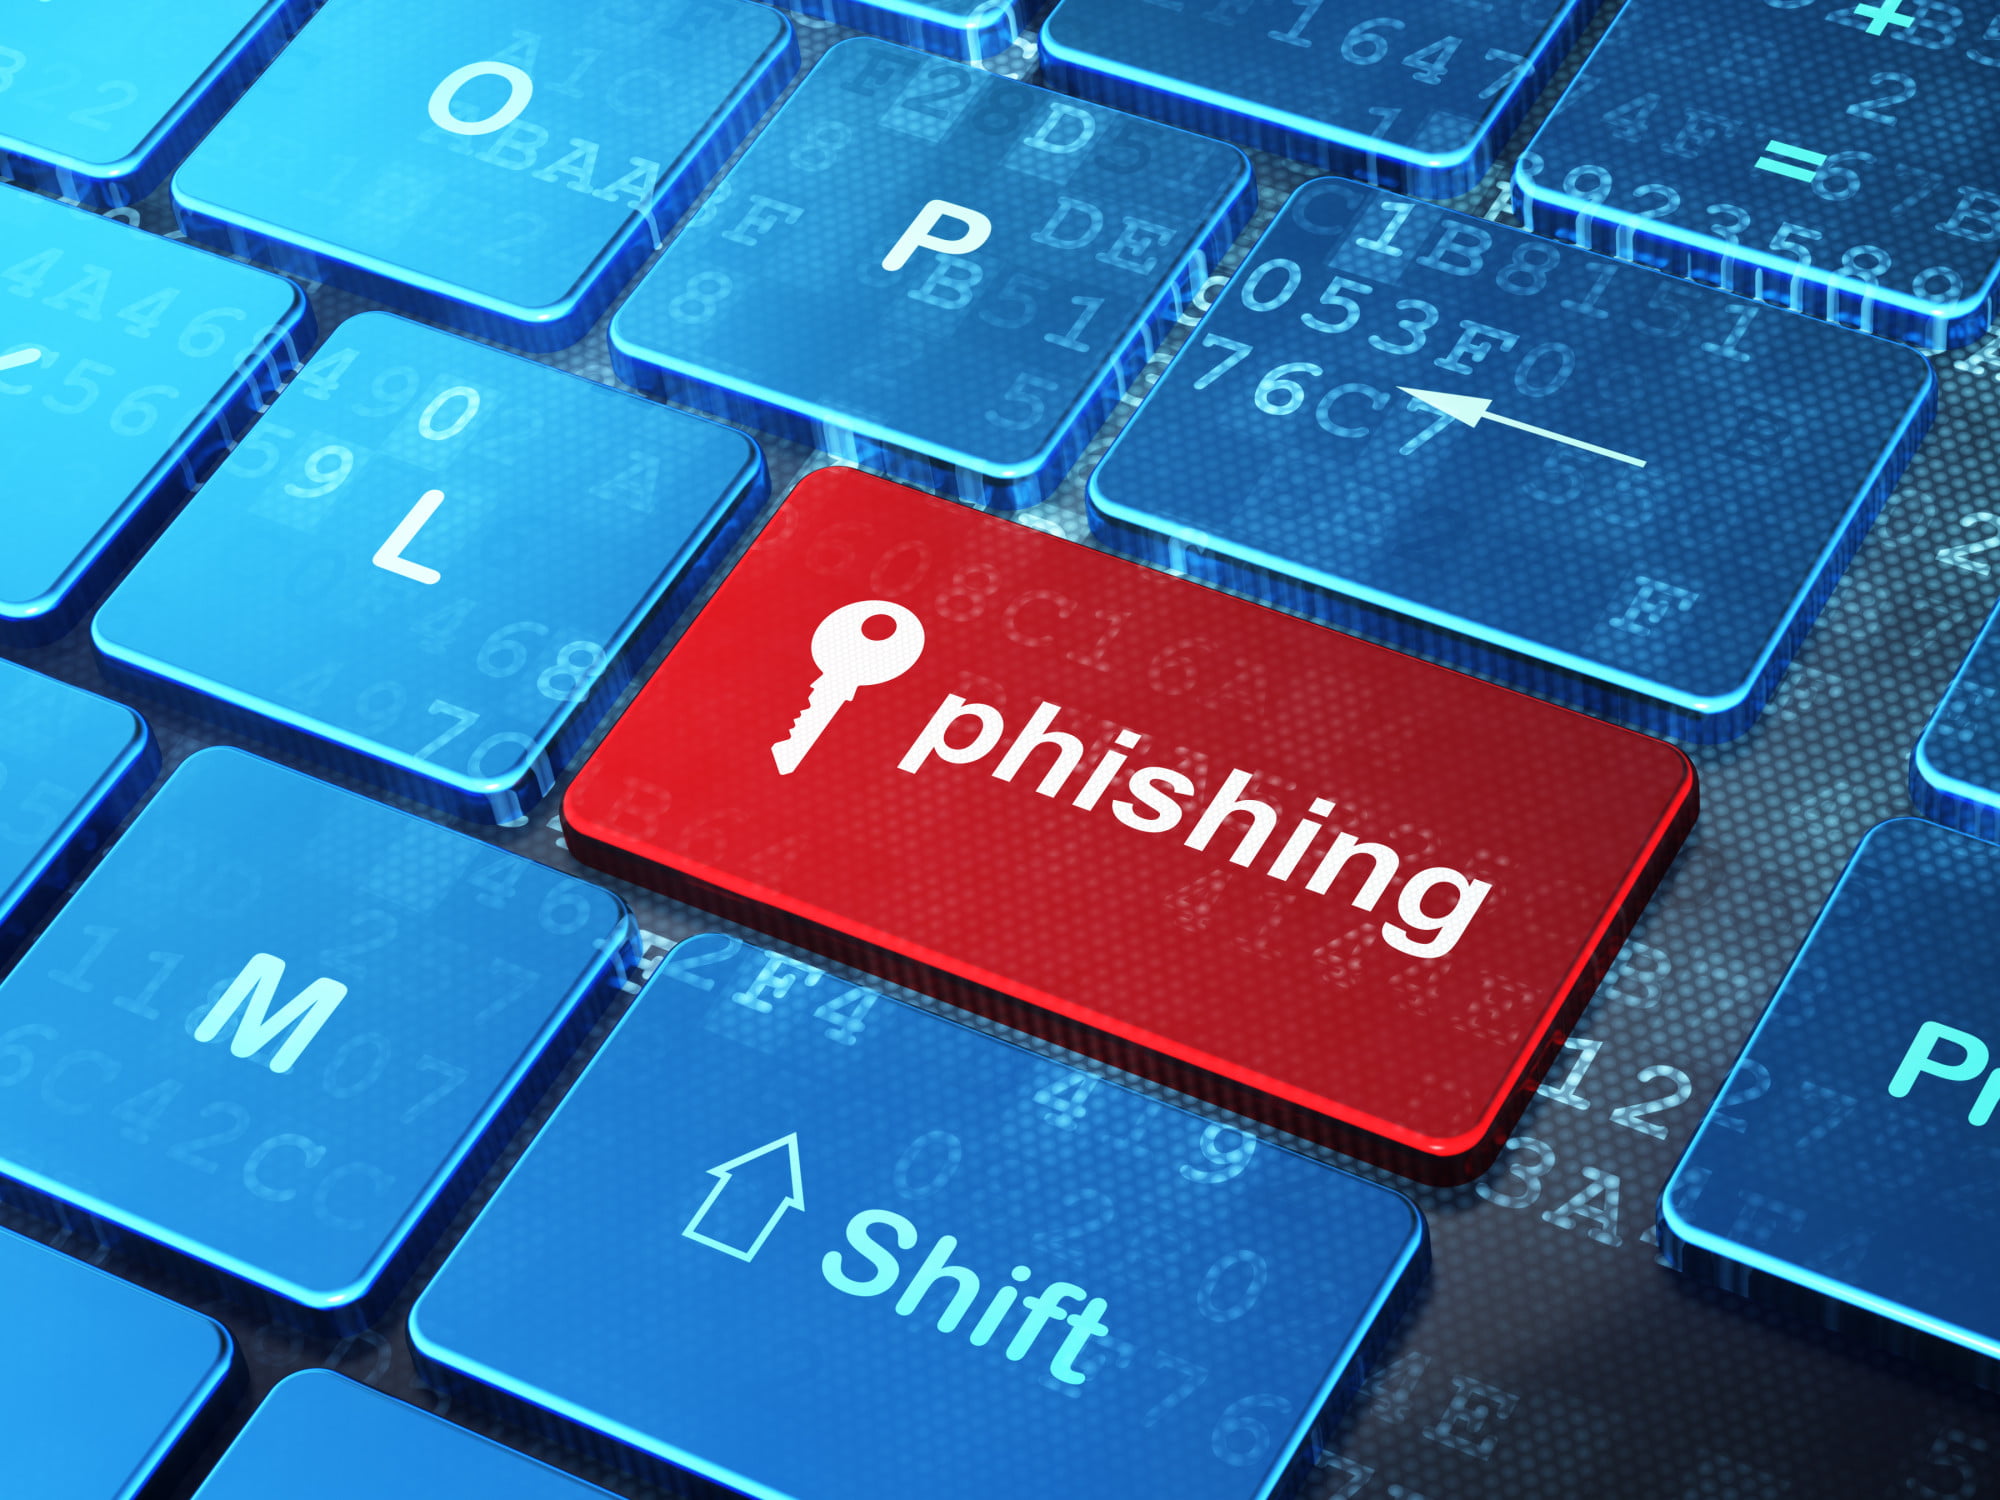 Something Fishy? How to Recognize a Phishing Scam